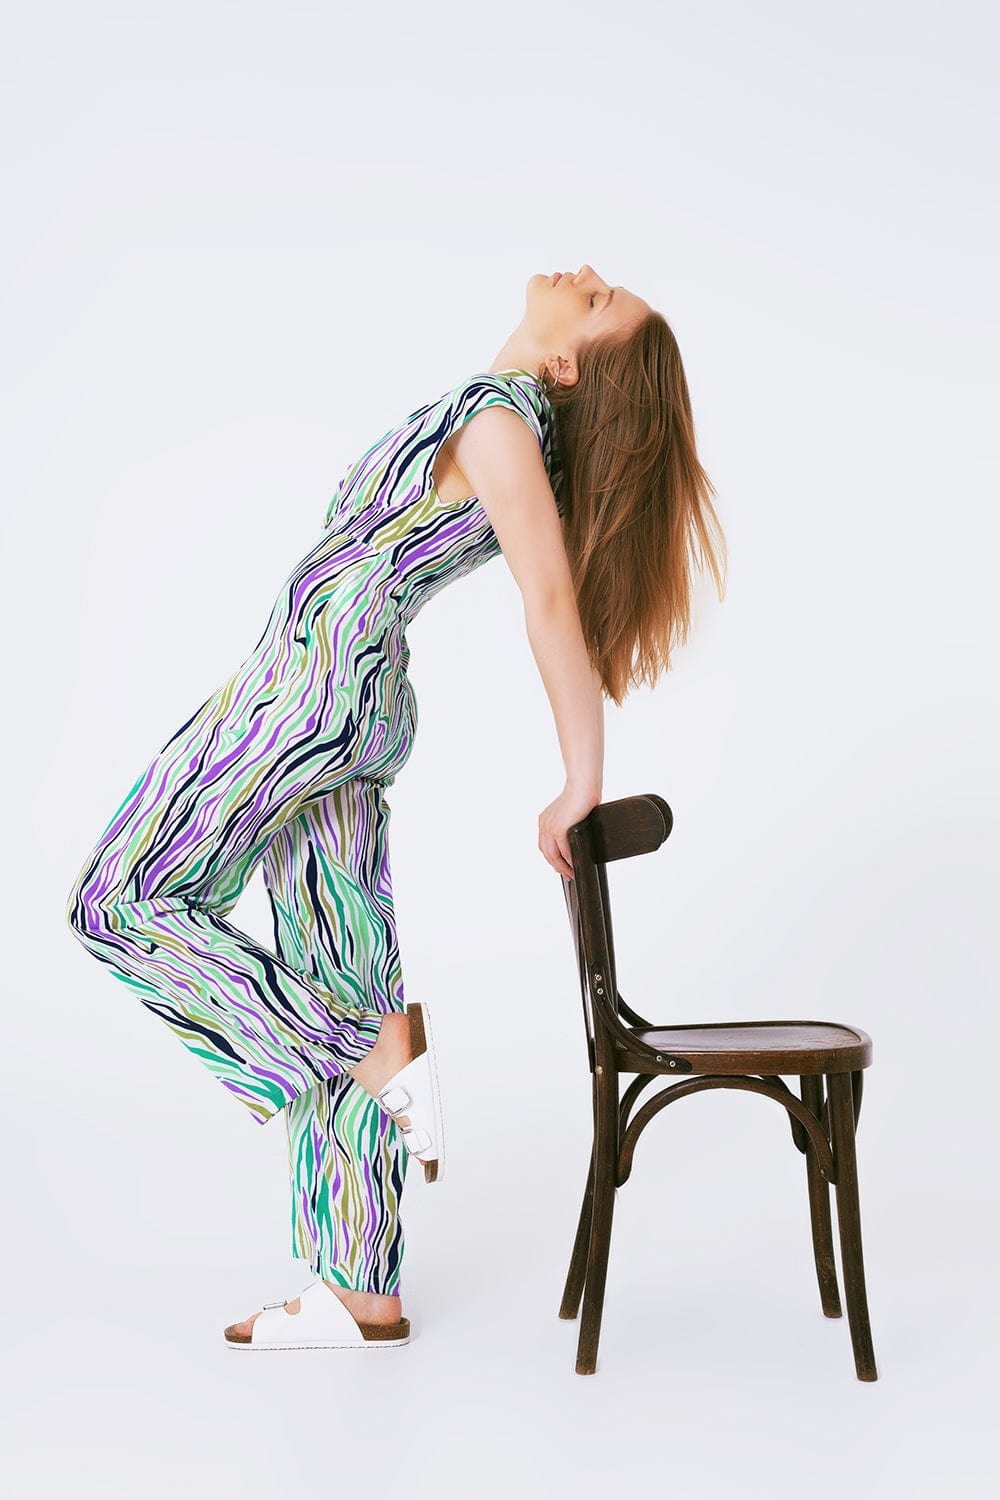 Q2 Women's Jumpsuits & Rompers Jumpsuit With Smoking Collard In Multicolored Abstract Print